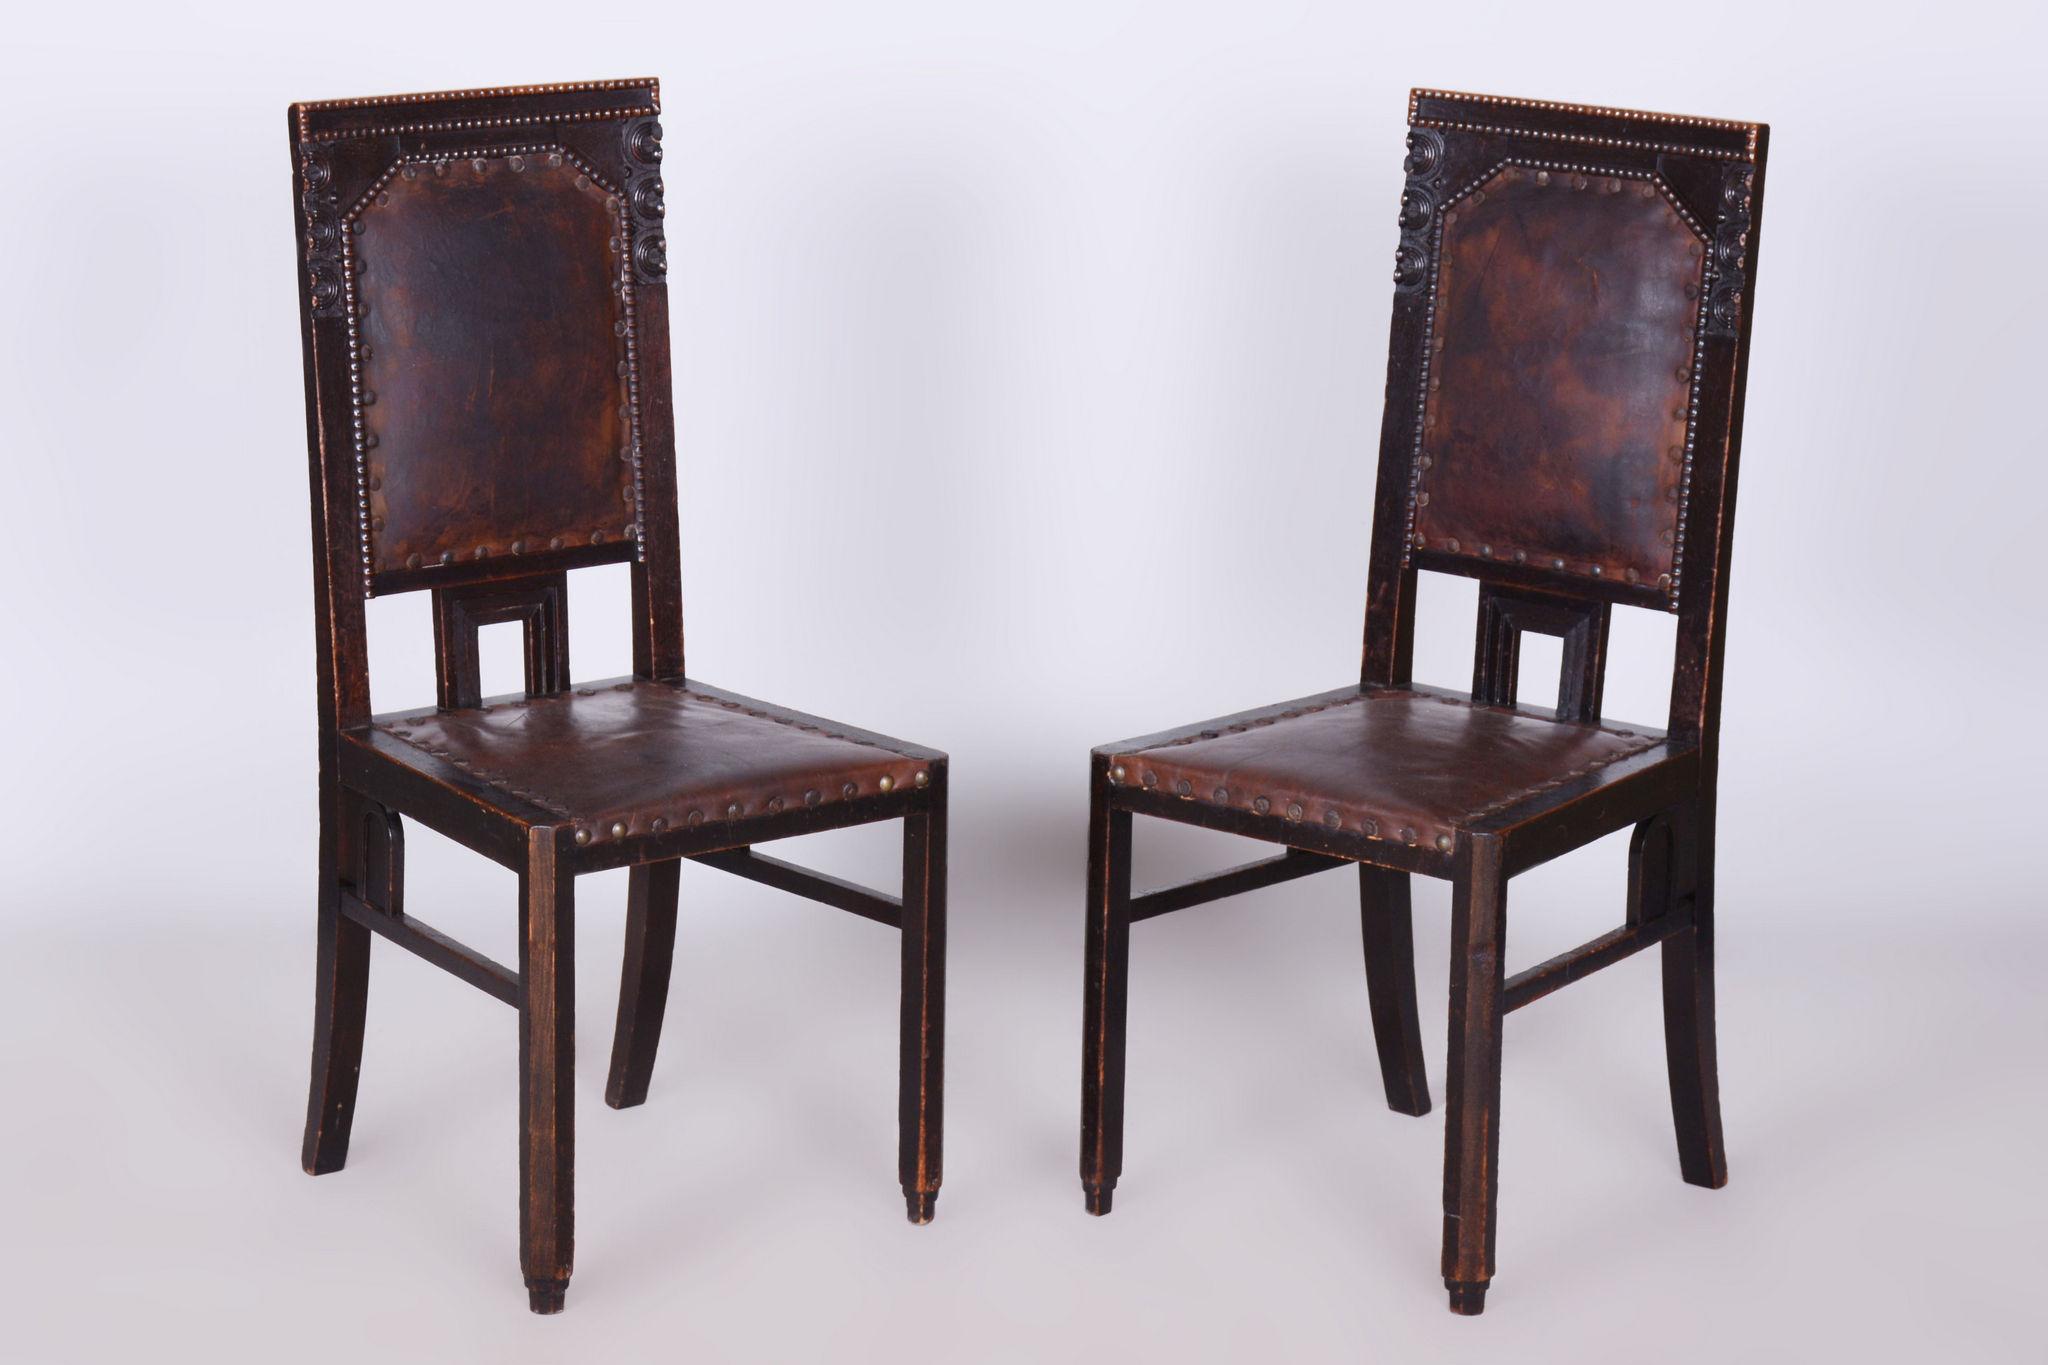 20th Century Set of Four Cubist Chairs, by Josef Gočár, Solid Oak, Red Leather, Czech, 1910s For Sale